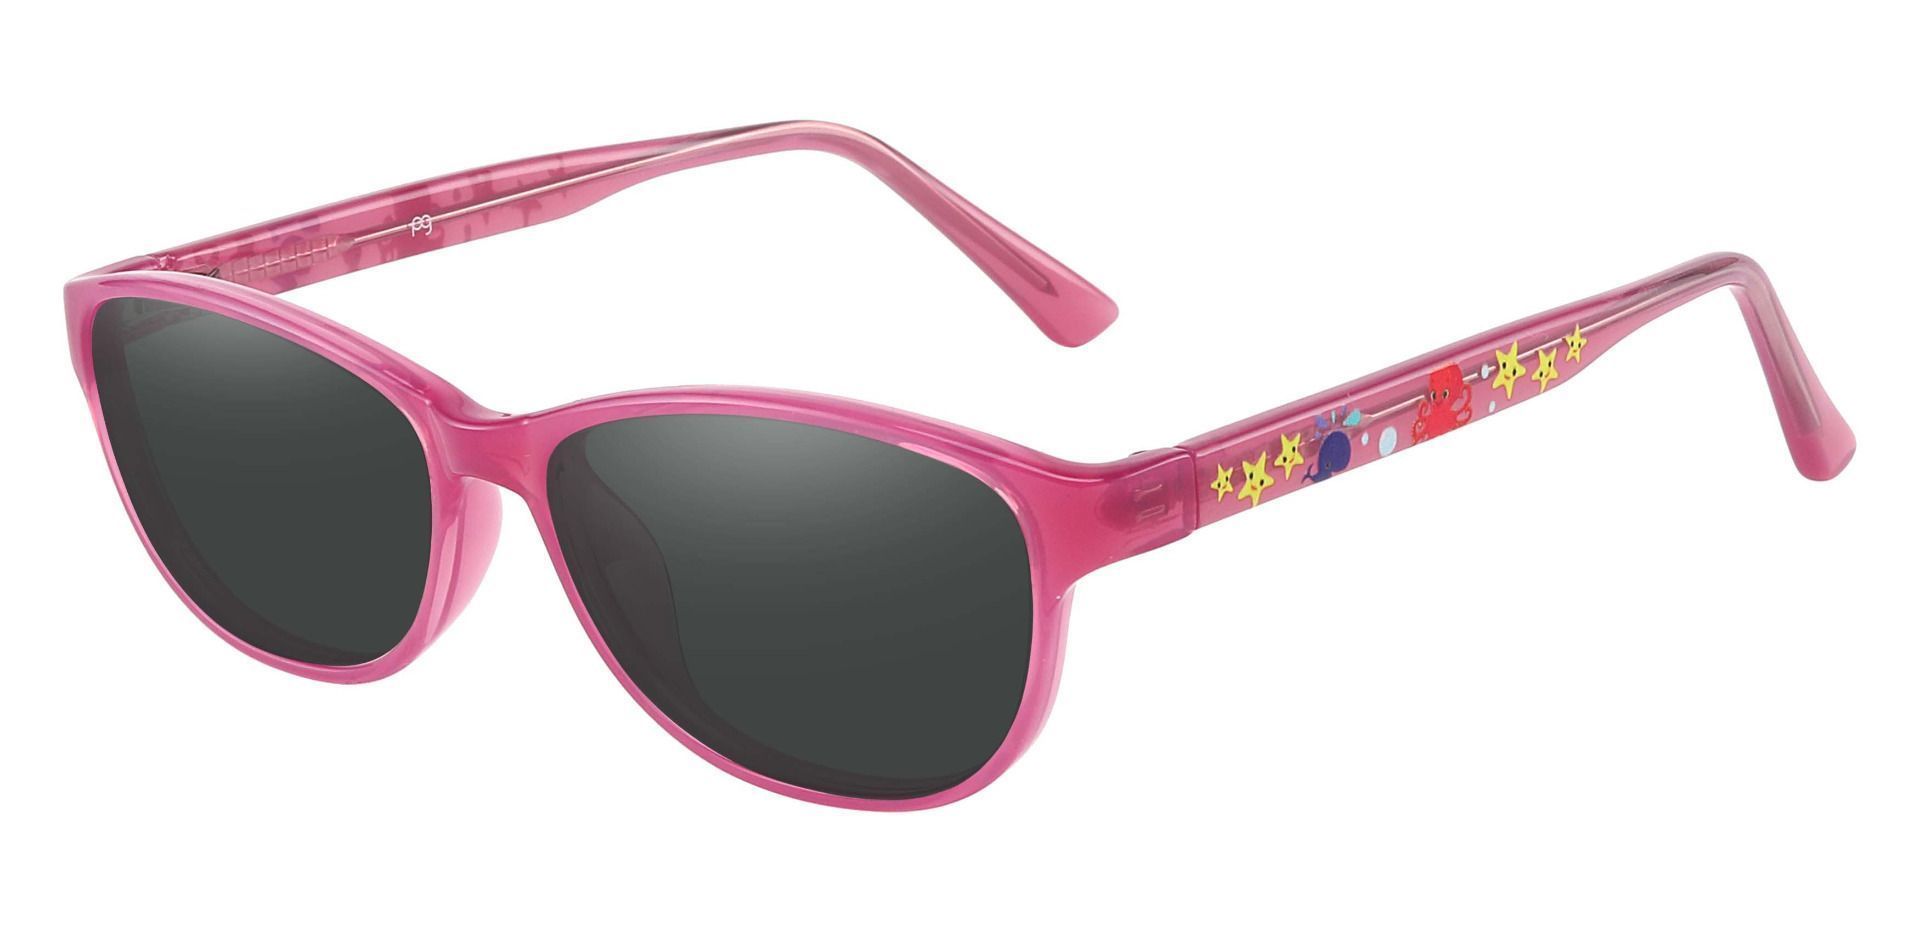 Patsy Oval Progressive Sunglasses - Pink Frame With Gray Lenses